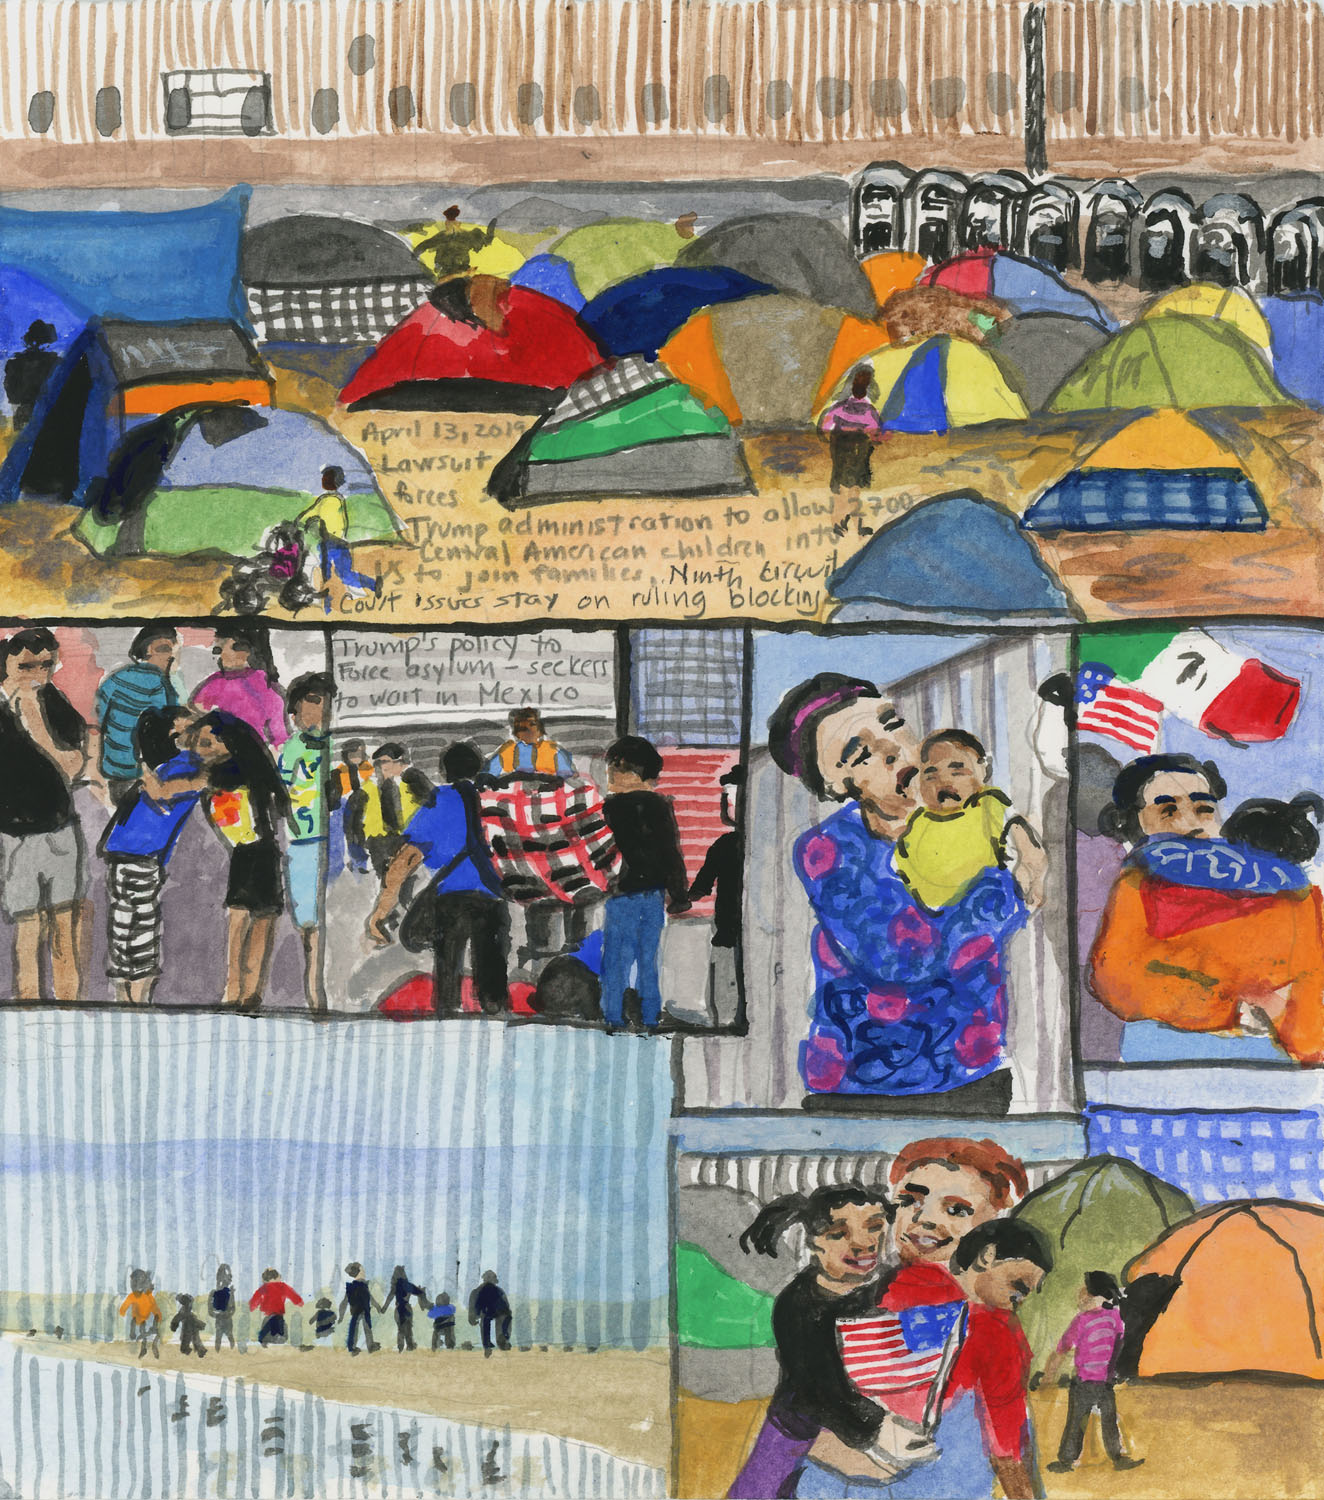 Day 1,239 (April 13, 2019)<br>Gouache, Watercolor, graphite on paper, 8 x 7 ¼ in.<br><i>Lawsuit forces Trump administration to allow 2,700 Central American children into the US to join families, Ninth Circuit Court issues stay on ruling blocking Trump’s policy to Force asylum-seekers to wait in Mexico.</i>